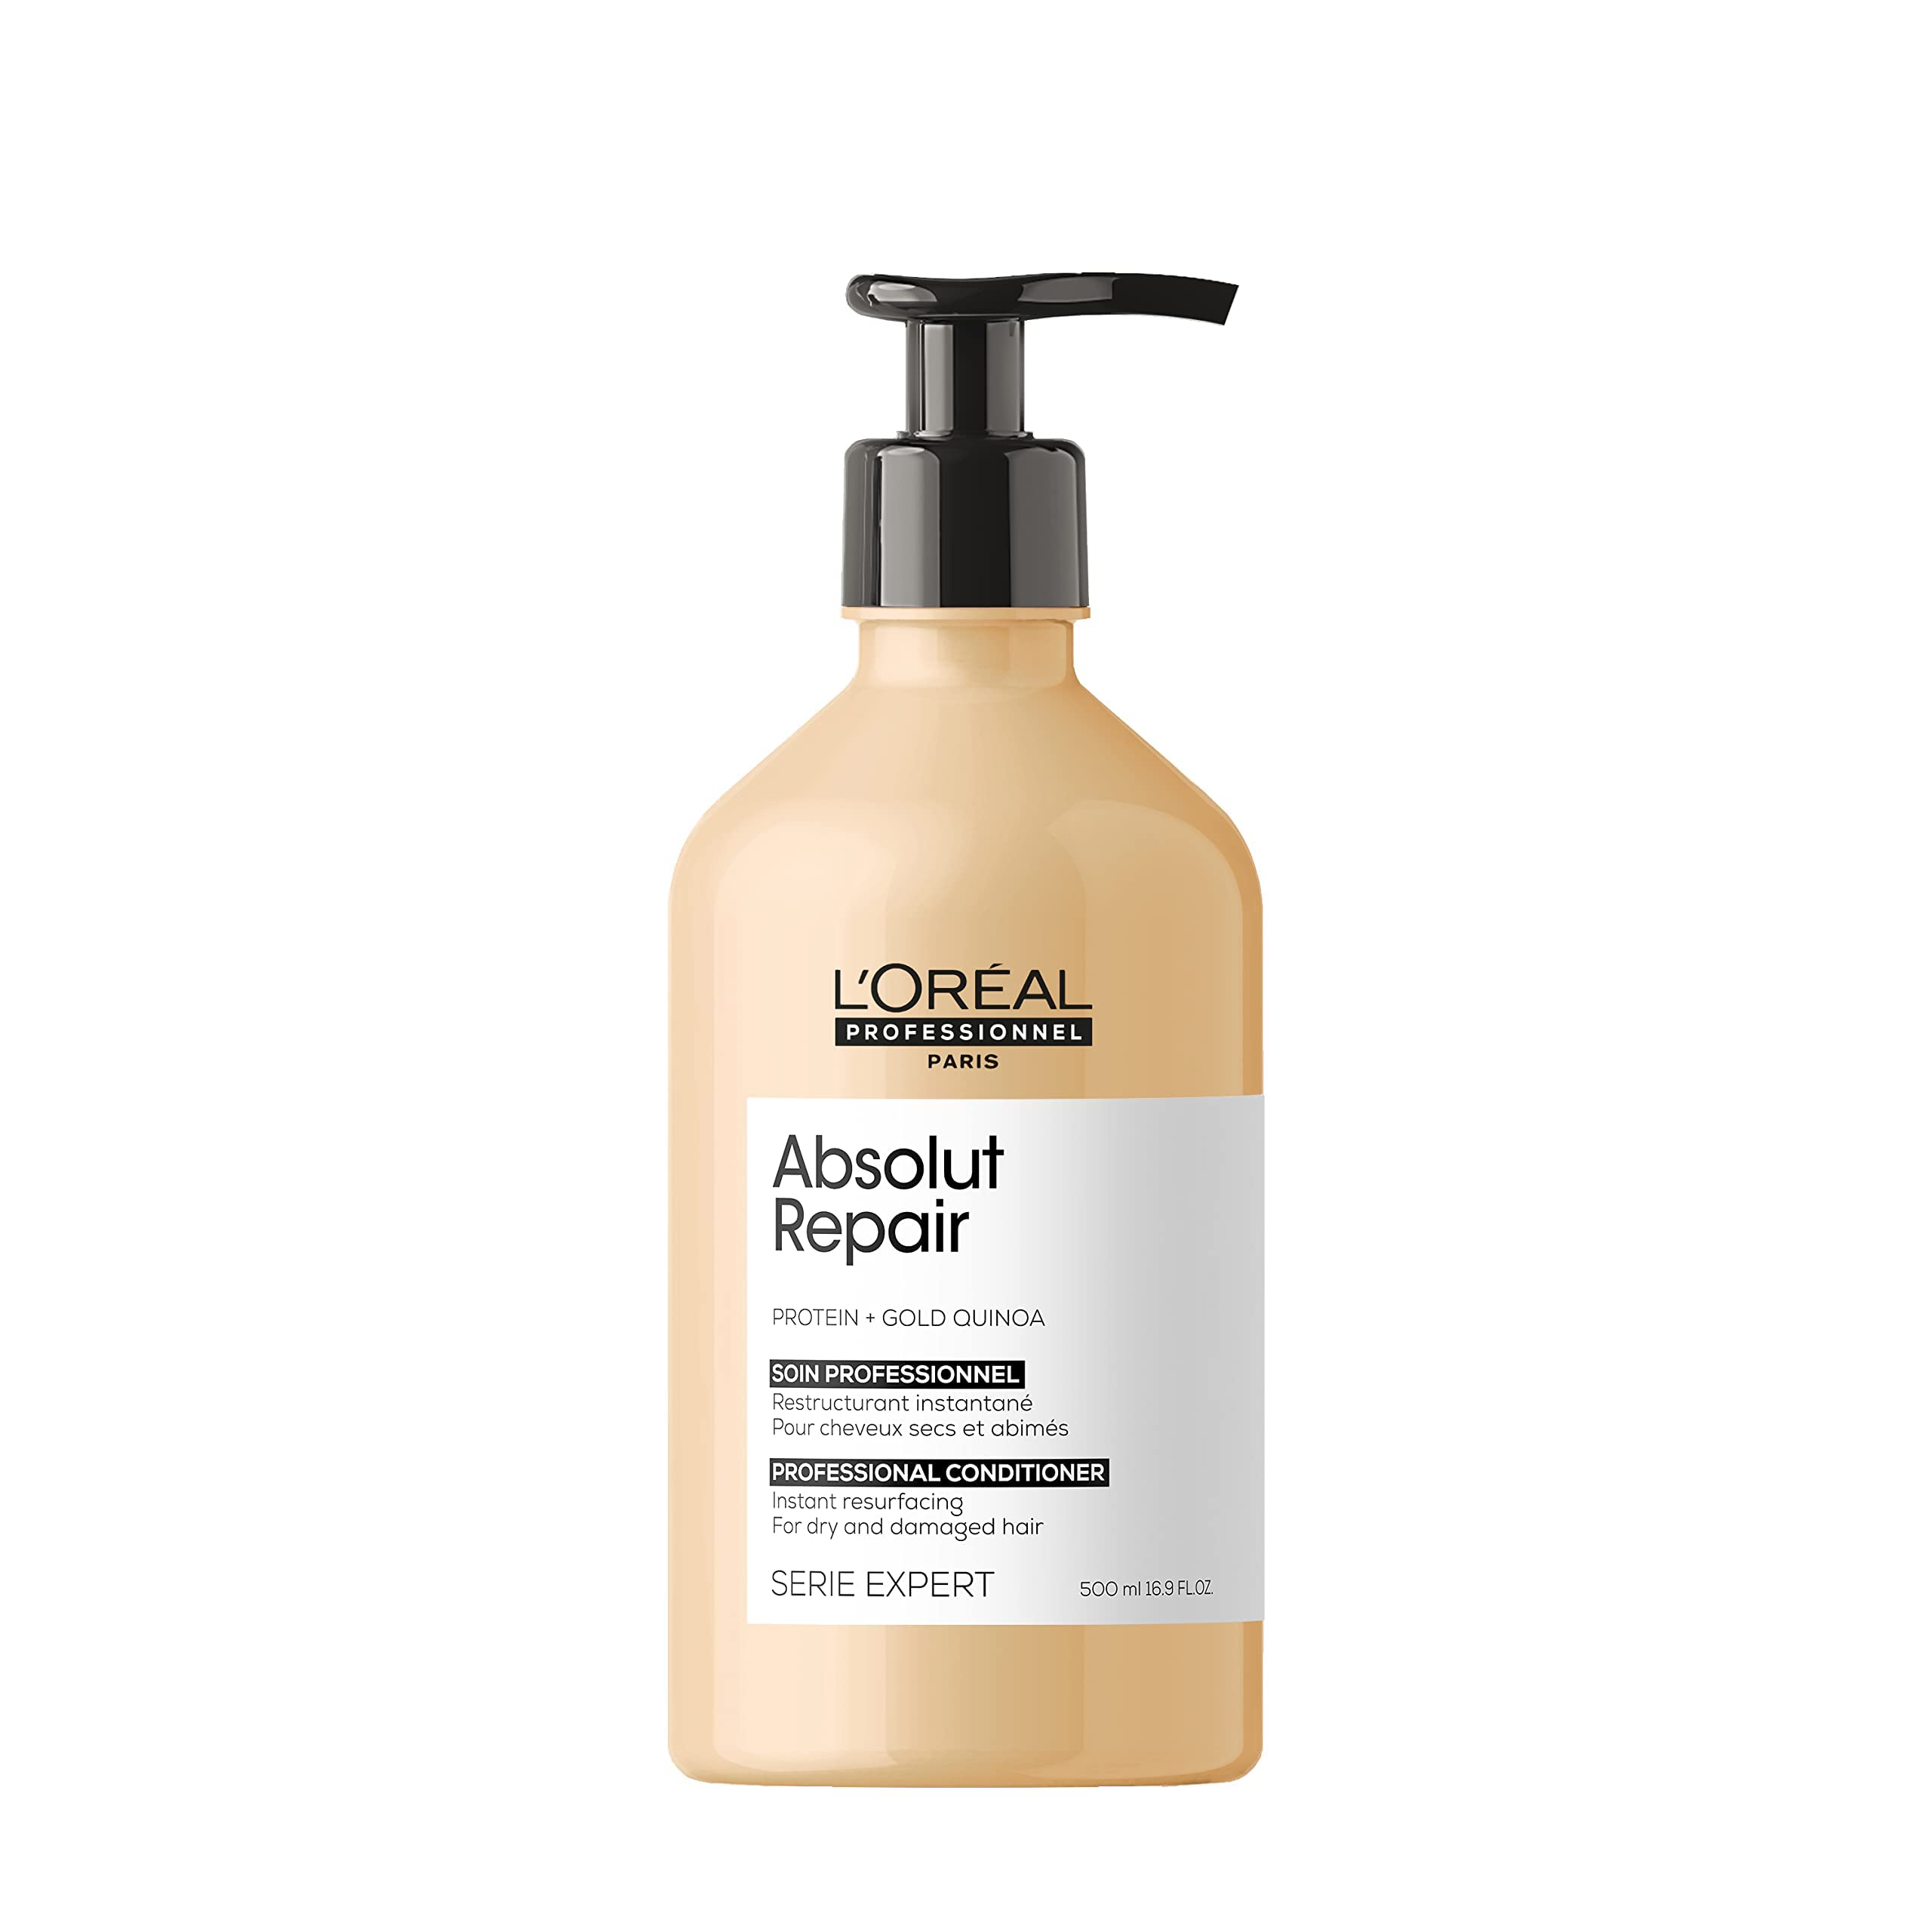 L'Oreal Professionnel Absolut Repair Conditioner | Protein Hair Treatment | Repairs Damage & Provides Shine | With Quinoa & Proteins | For Dry, Damaged Hair | 16.9 Fl. Oz.